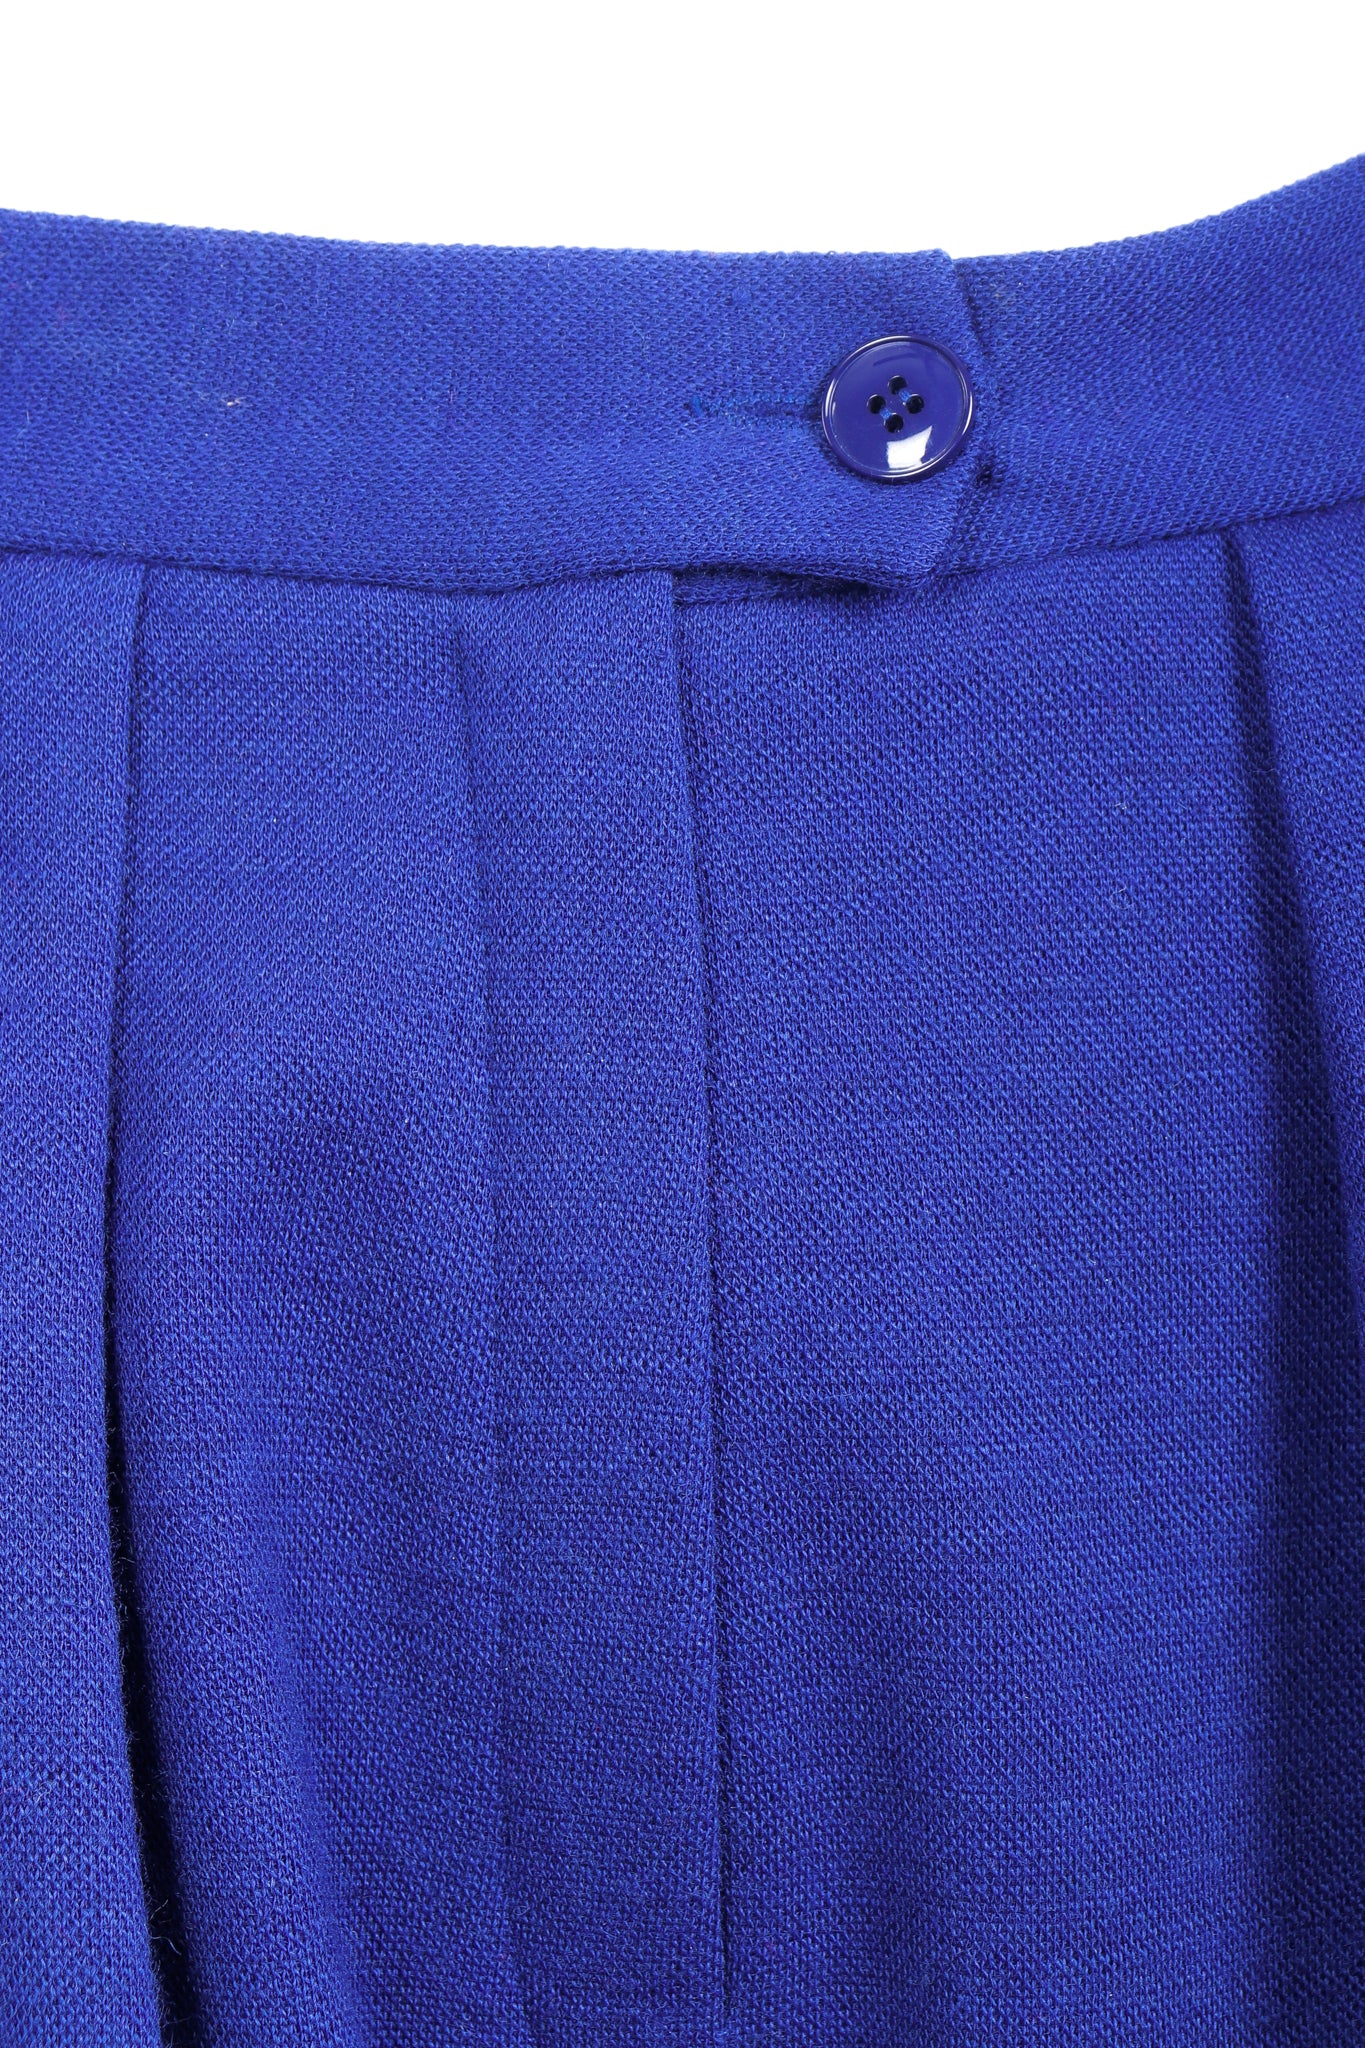 Vintage Sonia Rykiel Blue Knit Pleated Pant on Mannequin Waistband Detail at Recess